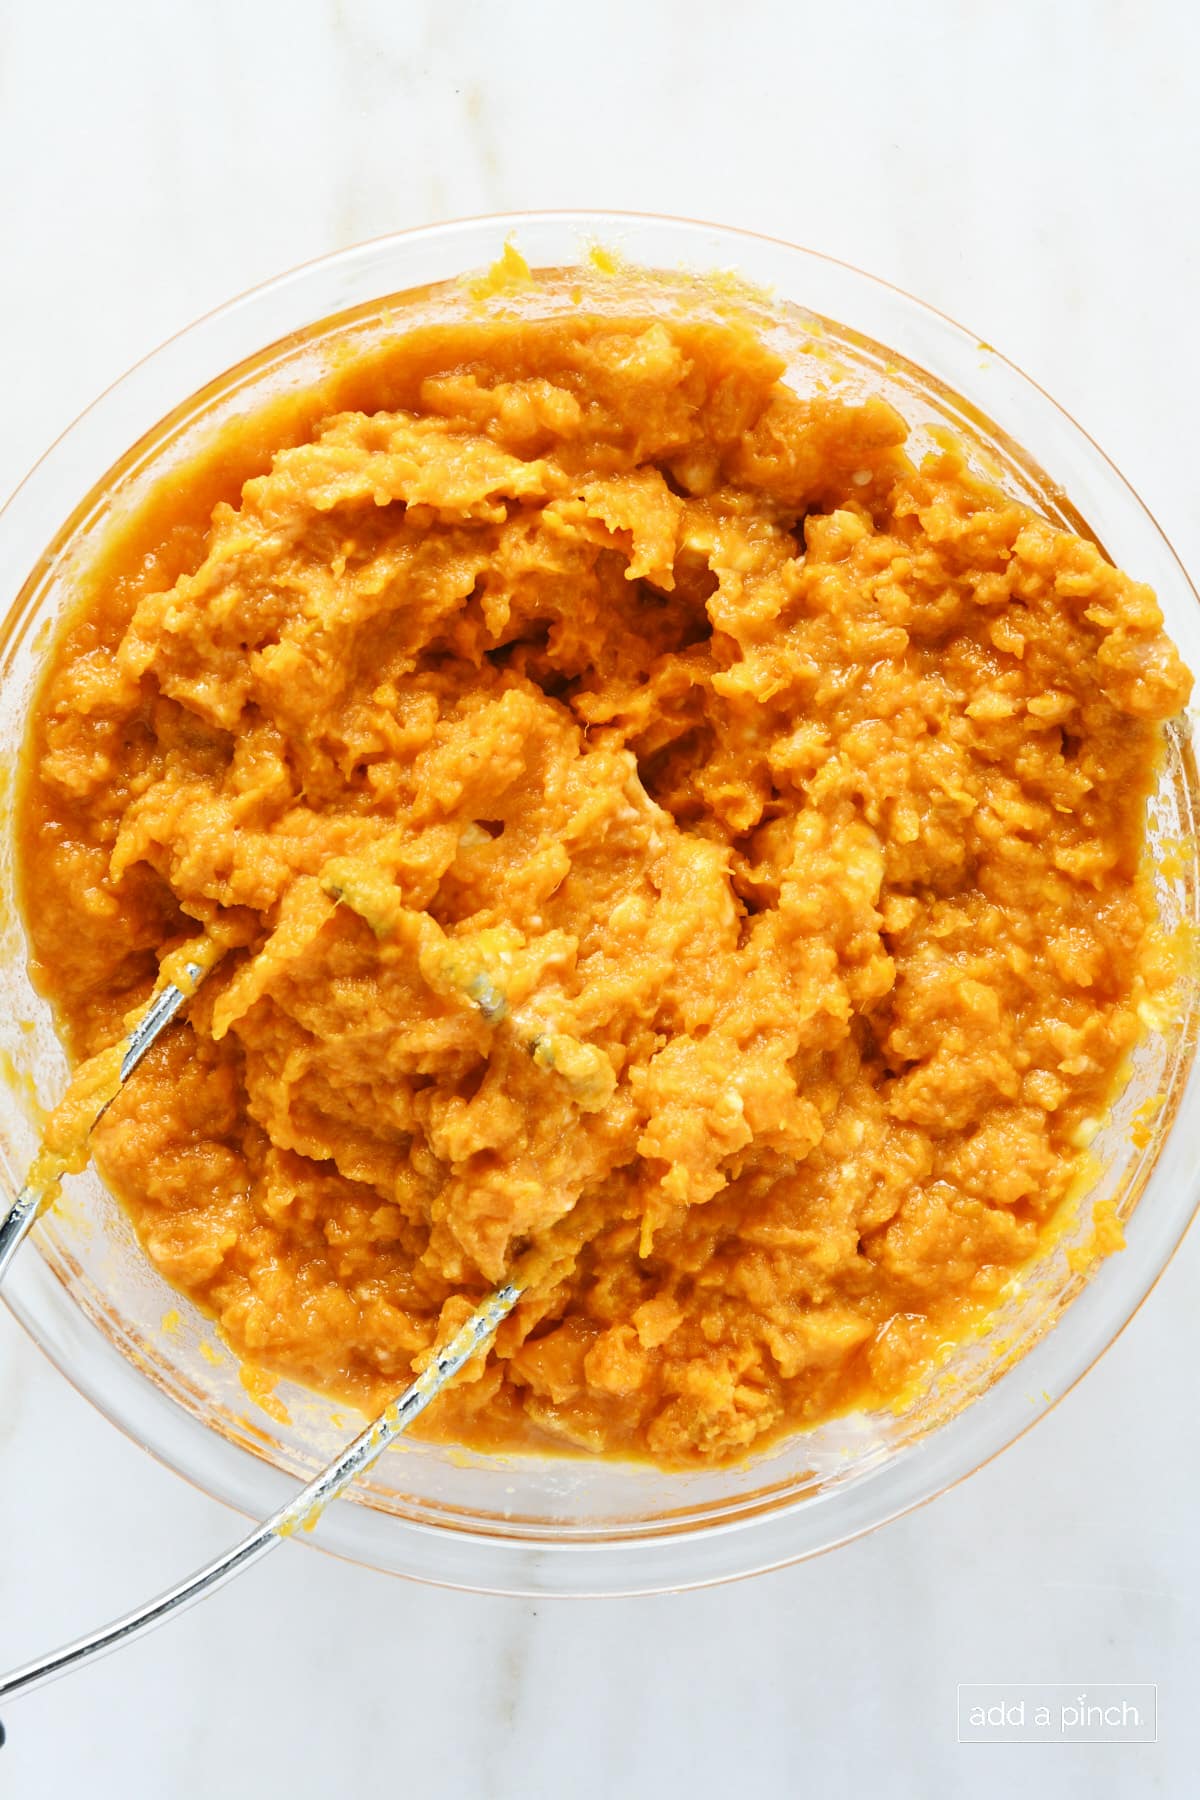 Sweet potato casserole ingredients mixed together in a glass mixing bowl.